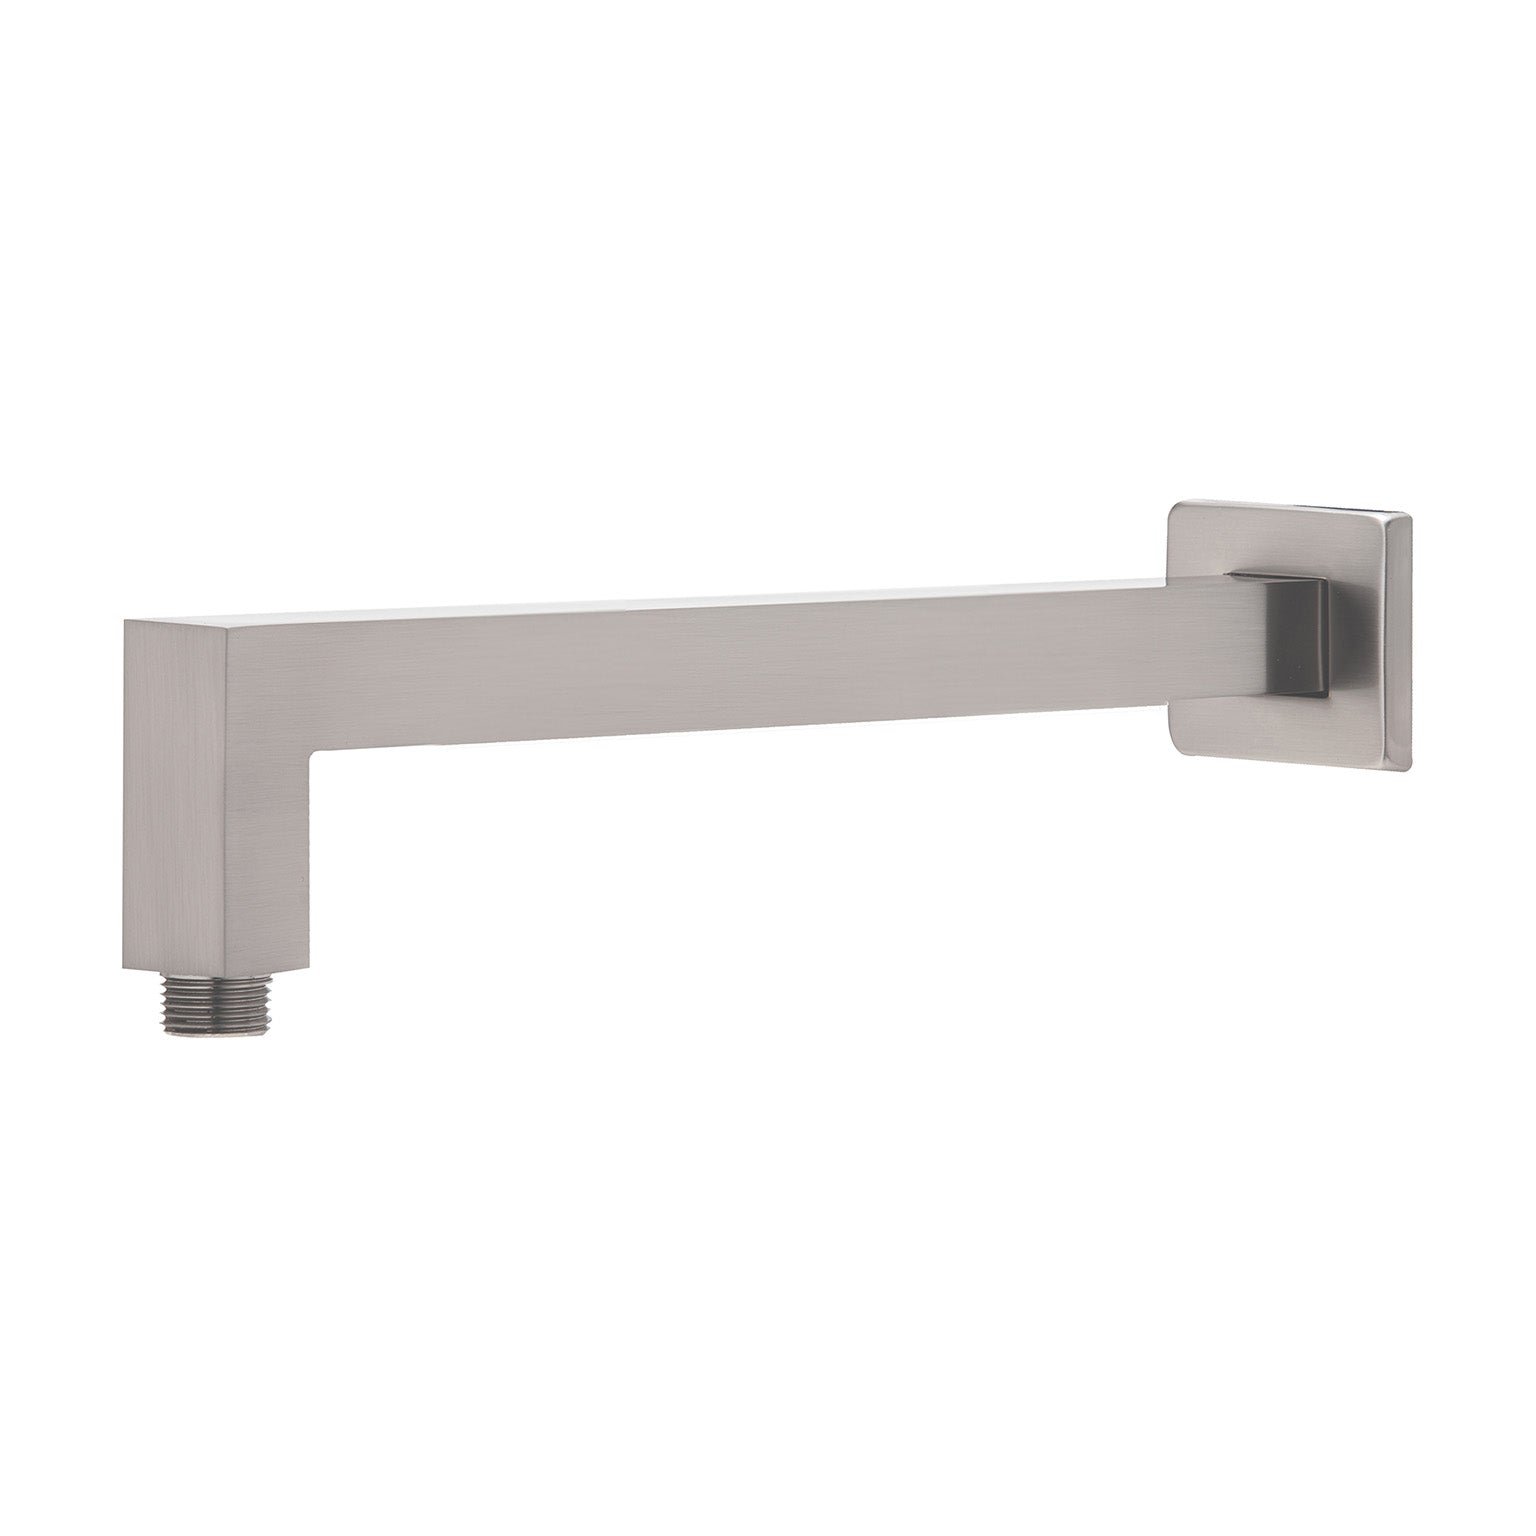 PHOENIX LEXI SHOWER ARM SQUARE BRUSHED NICKEL 400MM